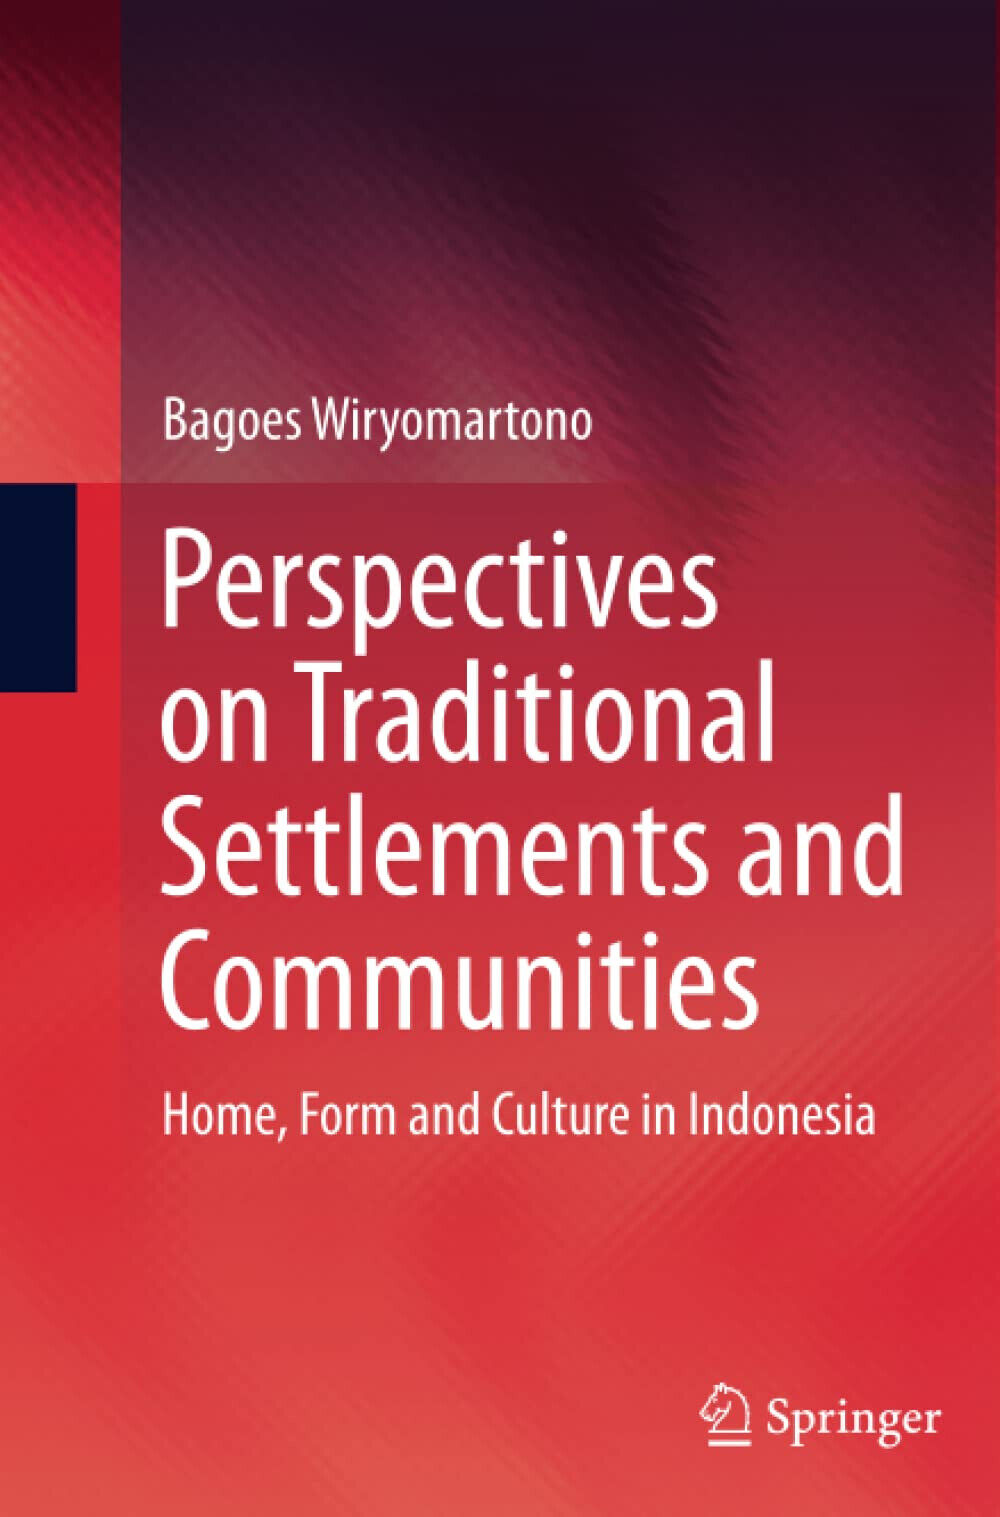 Perspectives on Traditional Settlements and Communities - Springer, 2016 libro usato